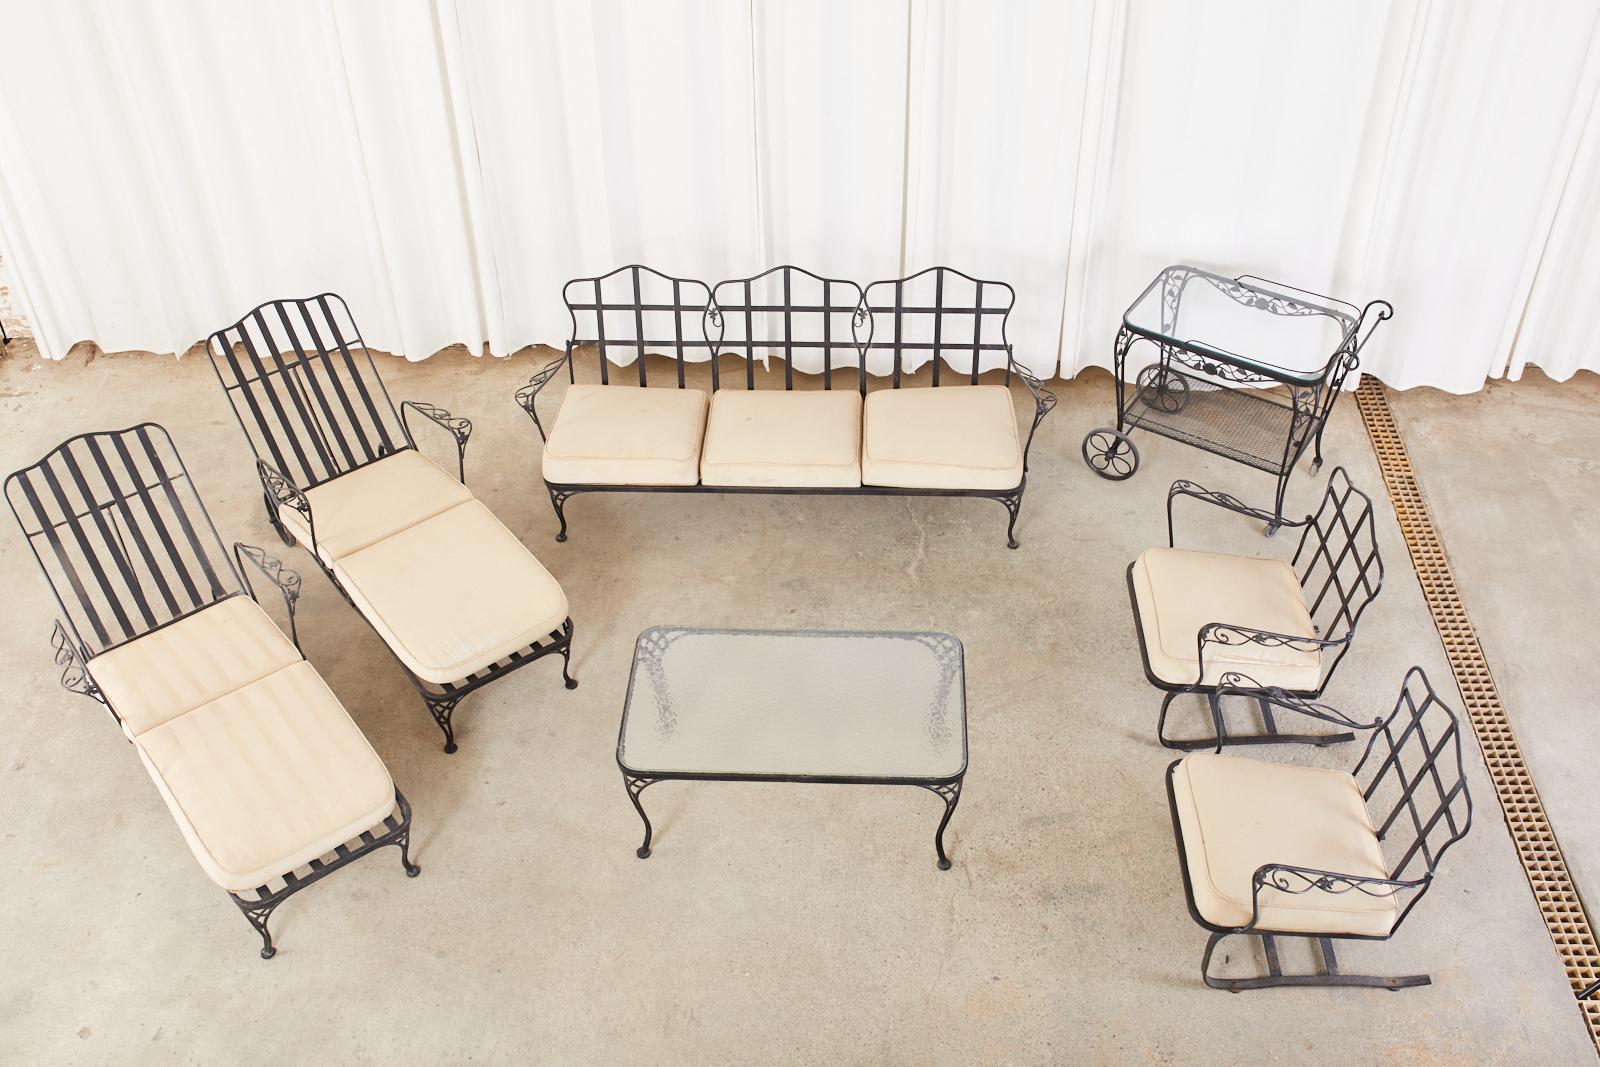 Grand Mid-Century Modern seven piece garden patio lounge set consisting of two adjustable chaise lounges with wheels, two rocking lounge chairs, one 3 seat settee, one 2 tier rolling bar cart, and one glass top cocktail table. Beautifully crafted